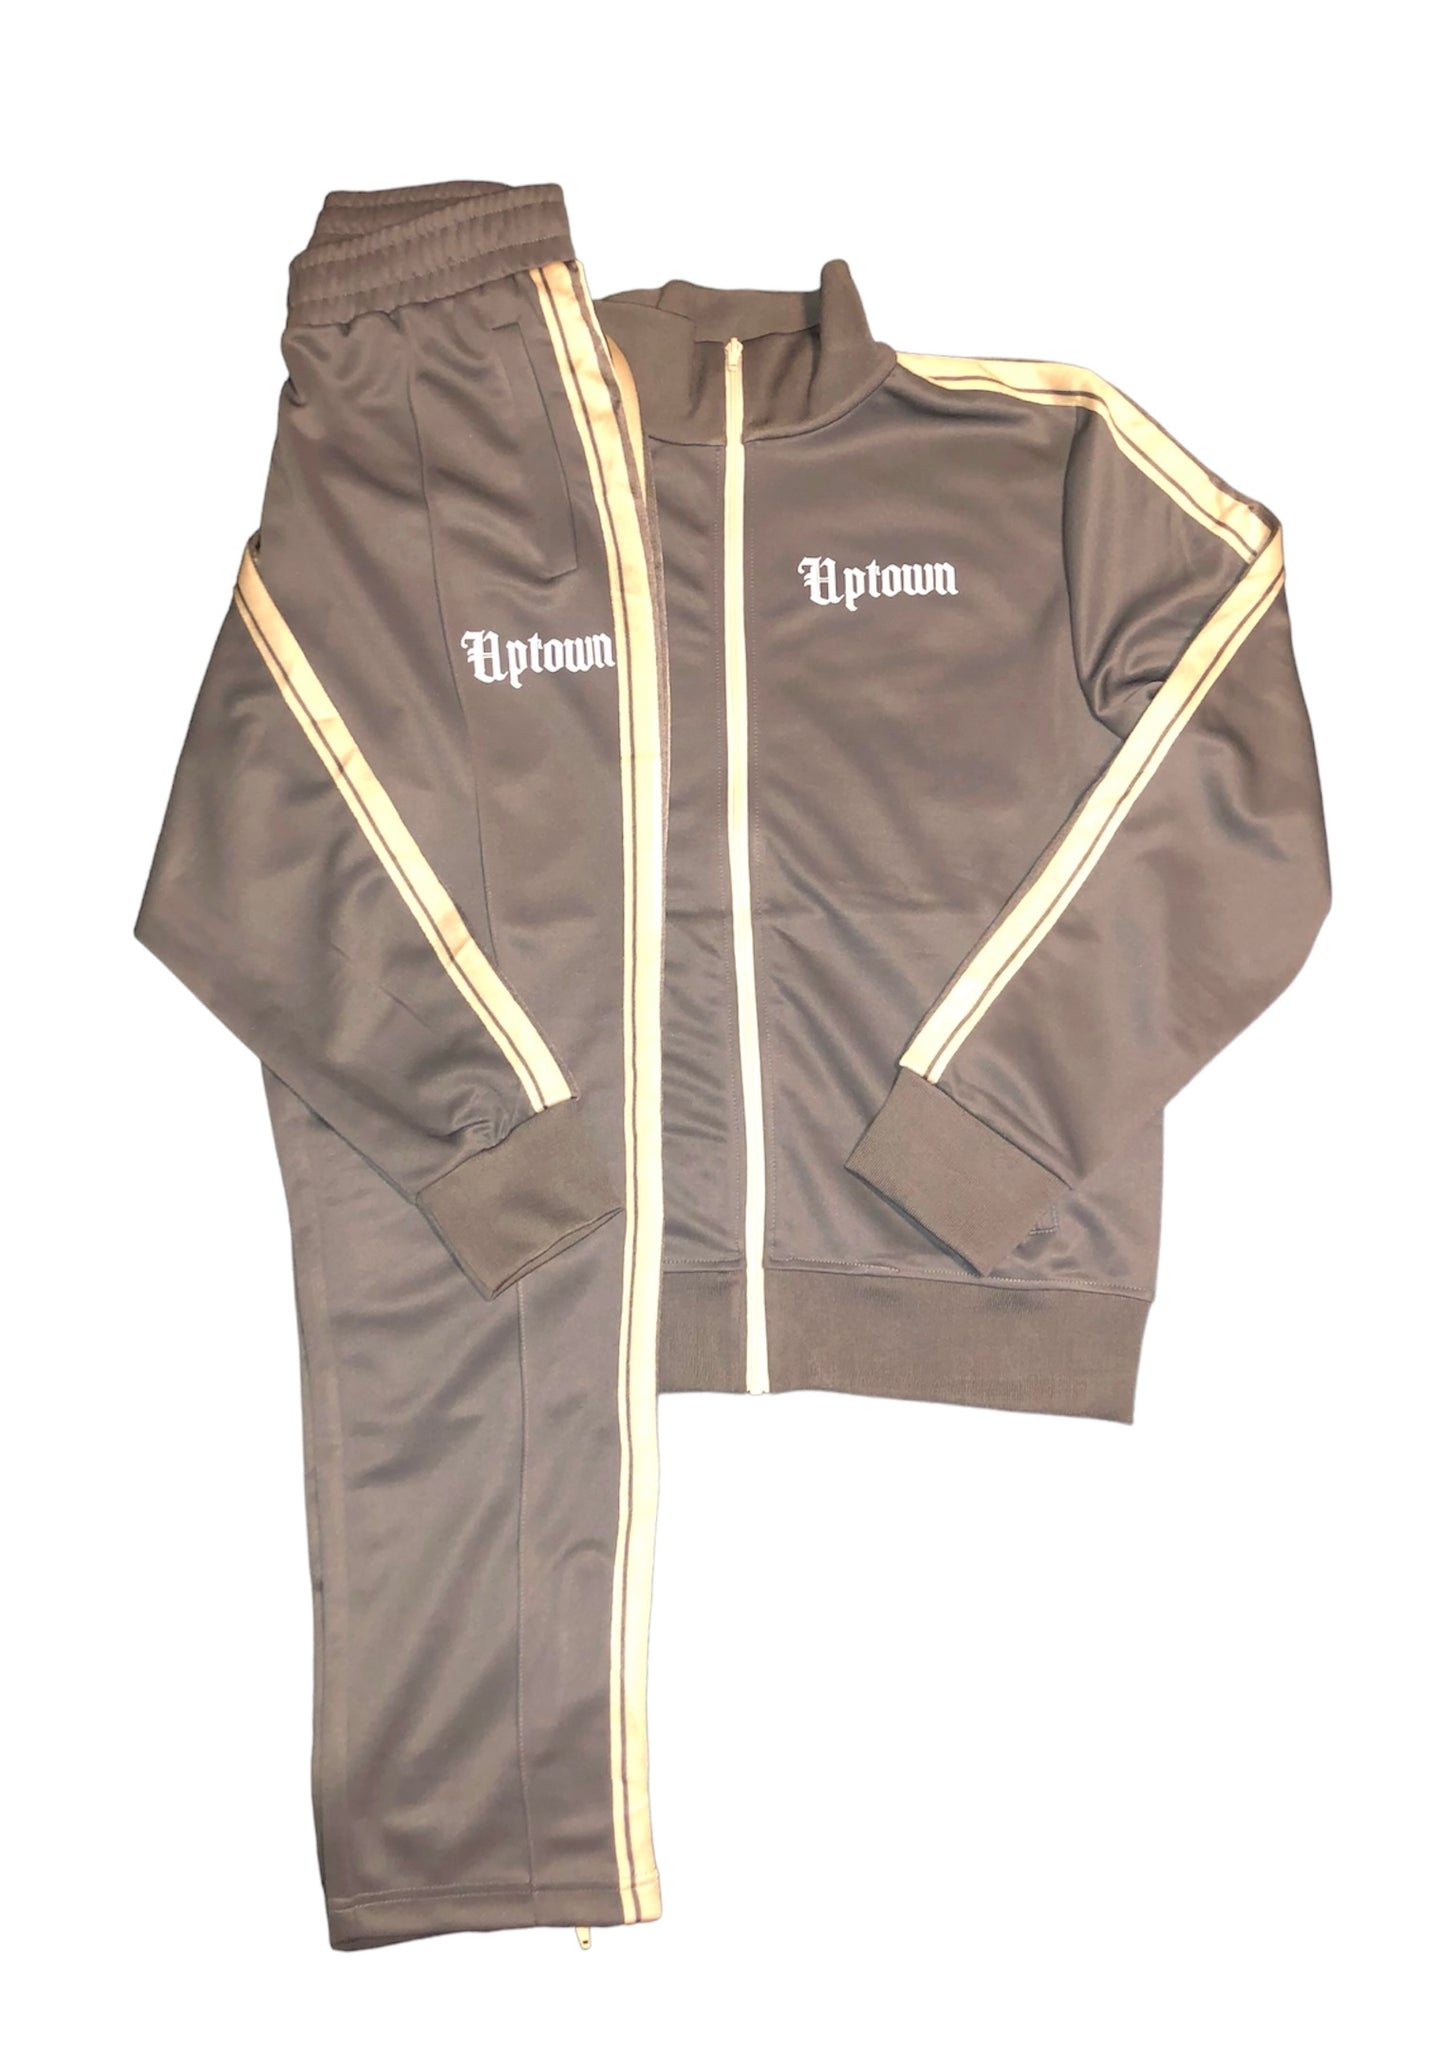 Uptown Track Suit